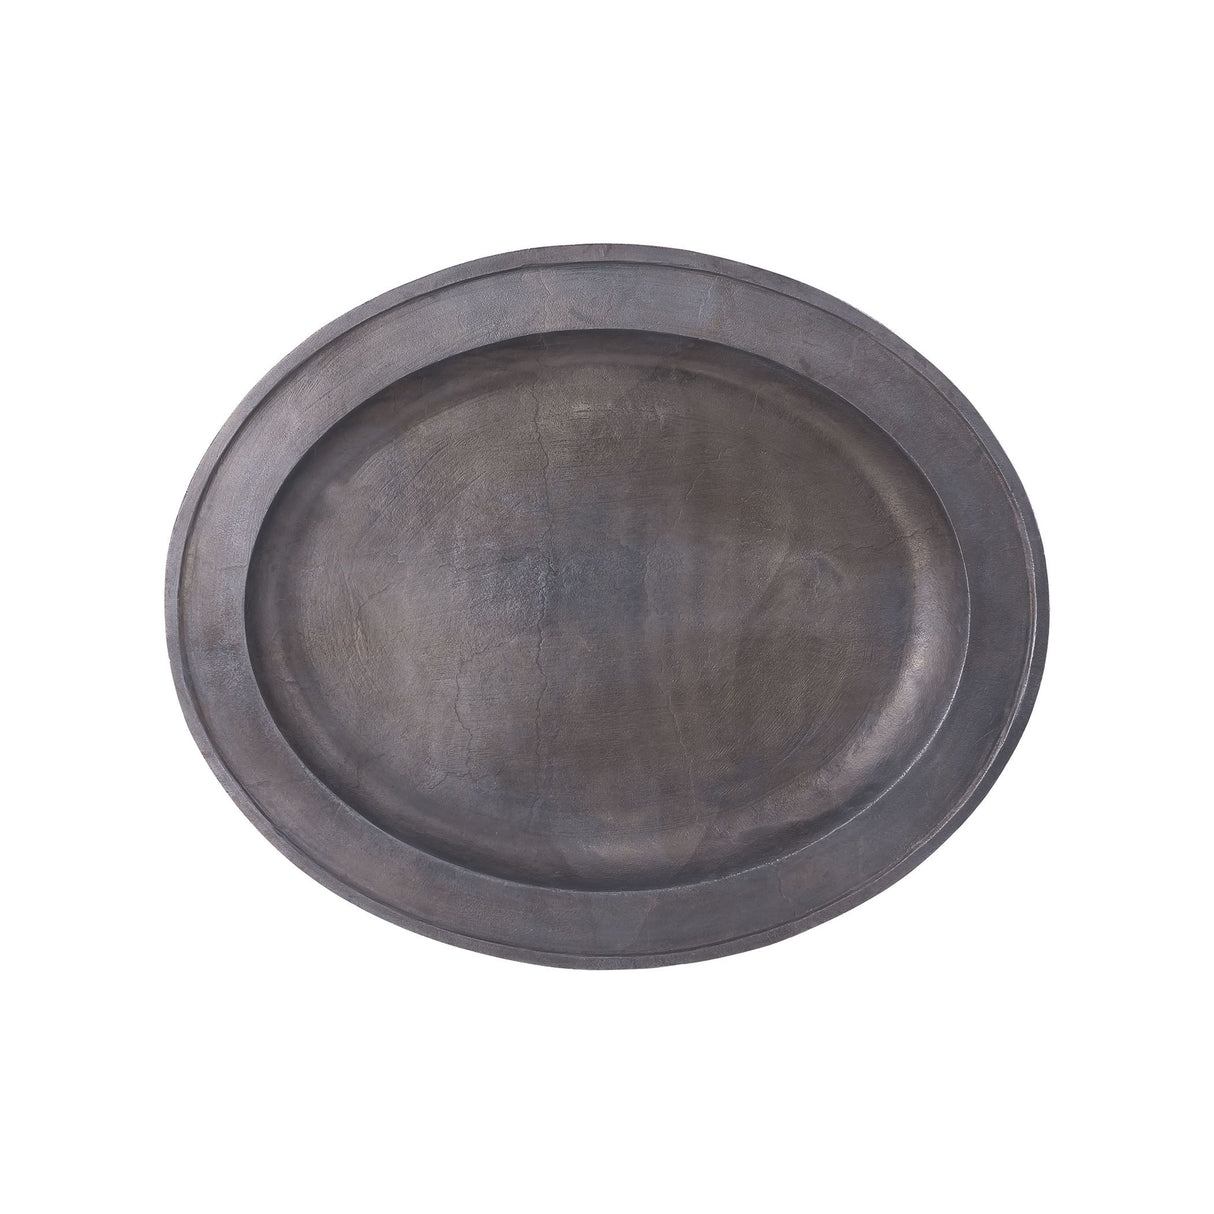 Elk TRAY059 Aluminum Round Tray without Handles